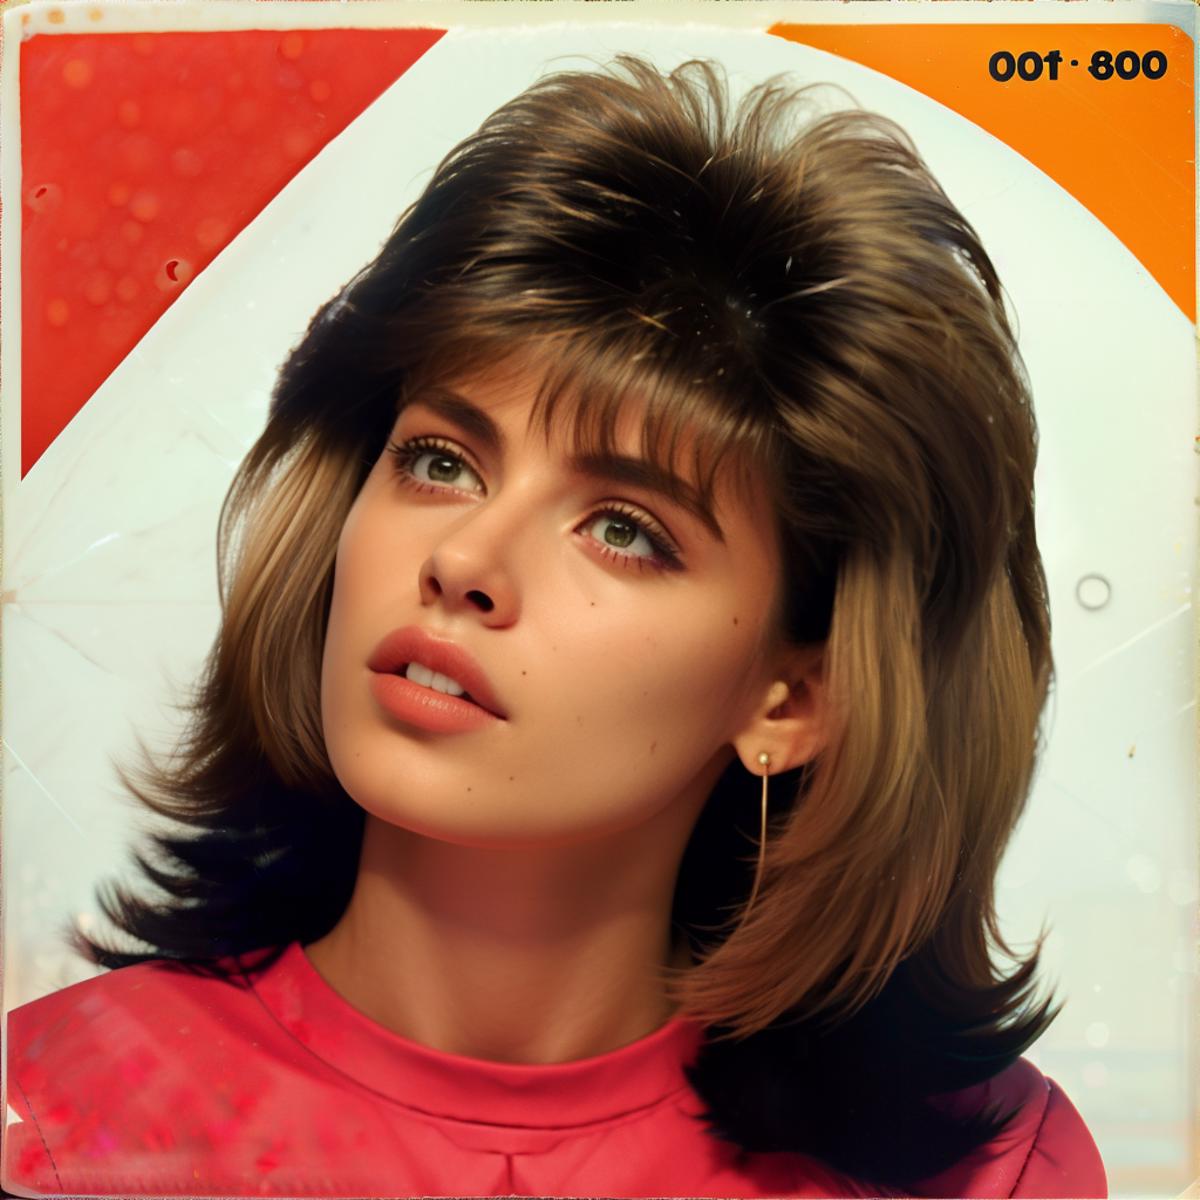 Bad Haircut Vinyl Record Covers image by bzlibby